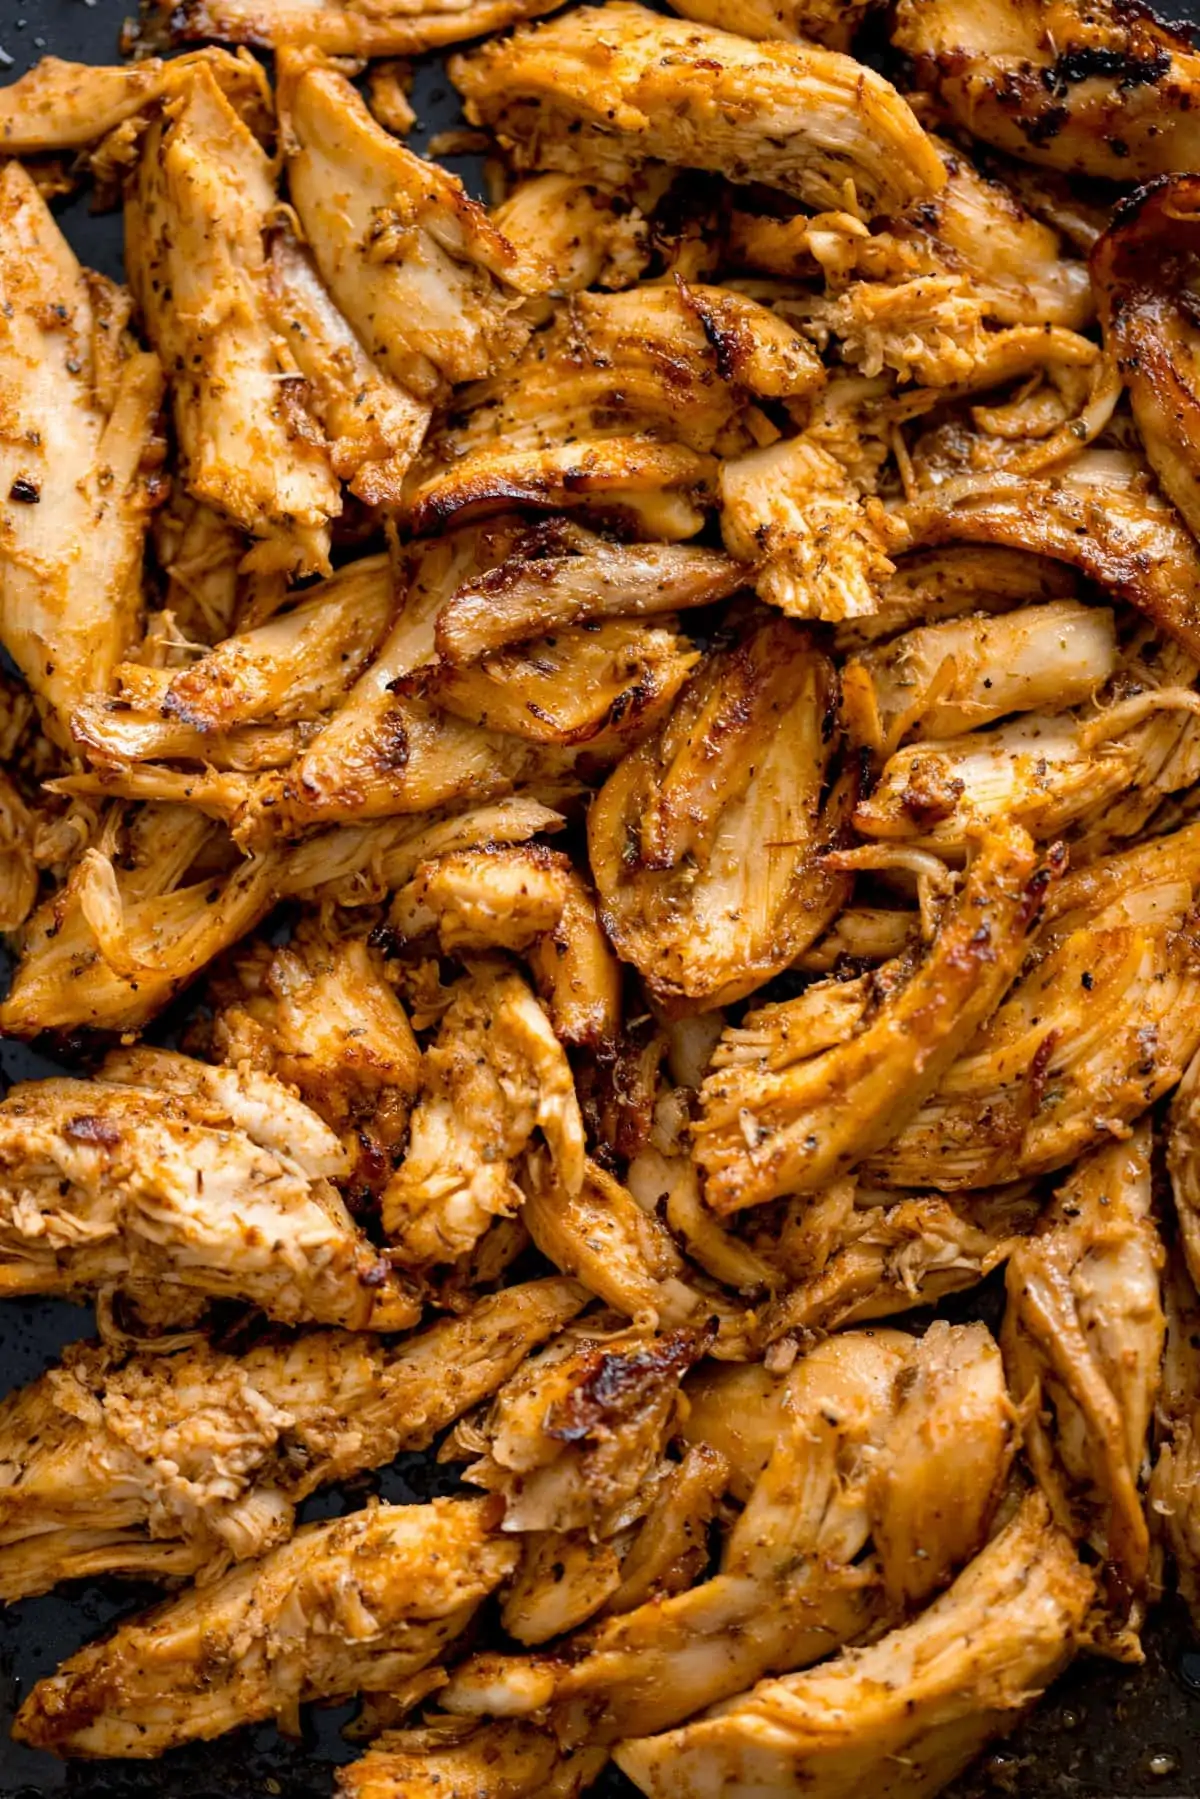 Overhead shot of shredded, spiced, grilled chicken - ready for making chicken gyros.